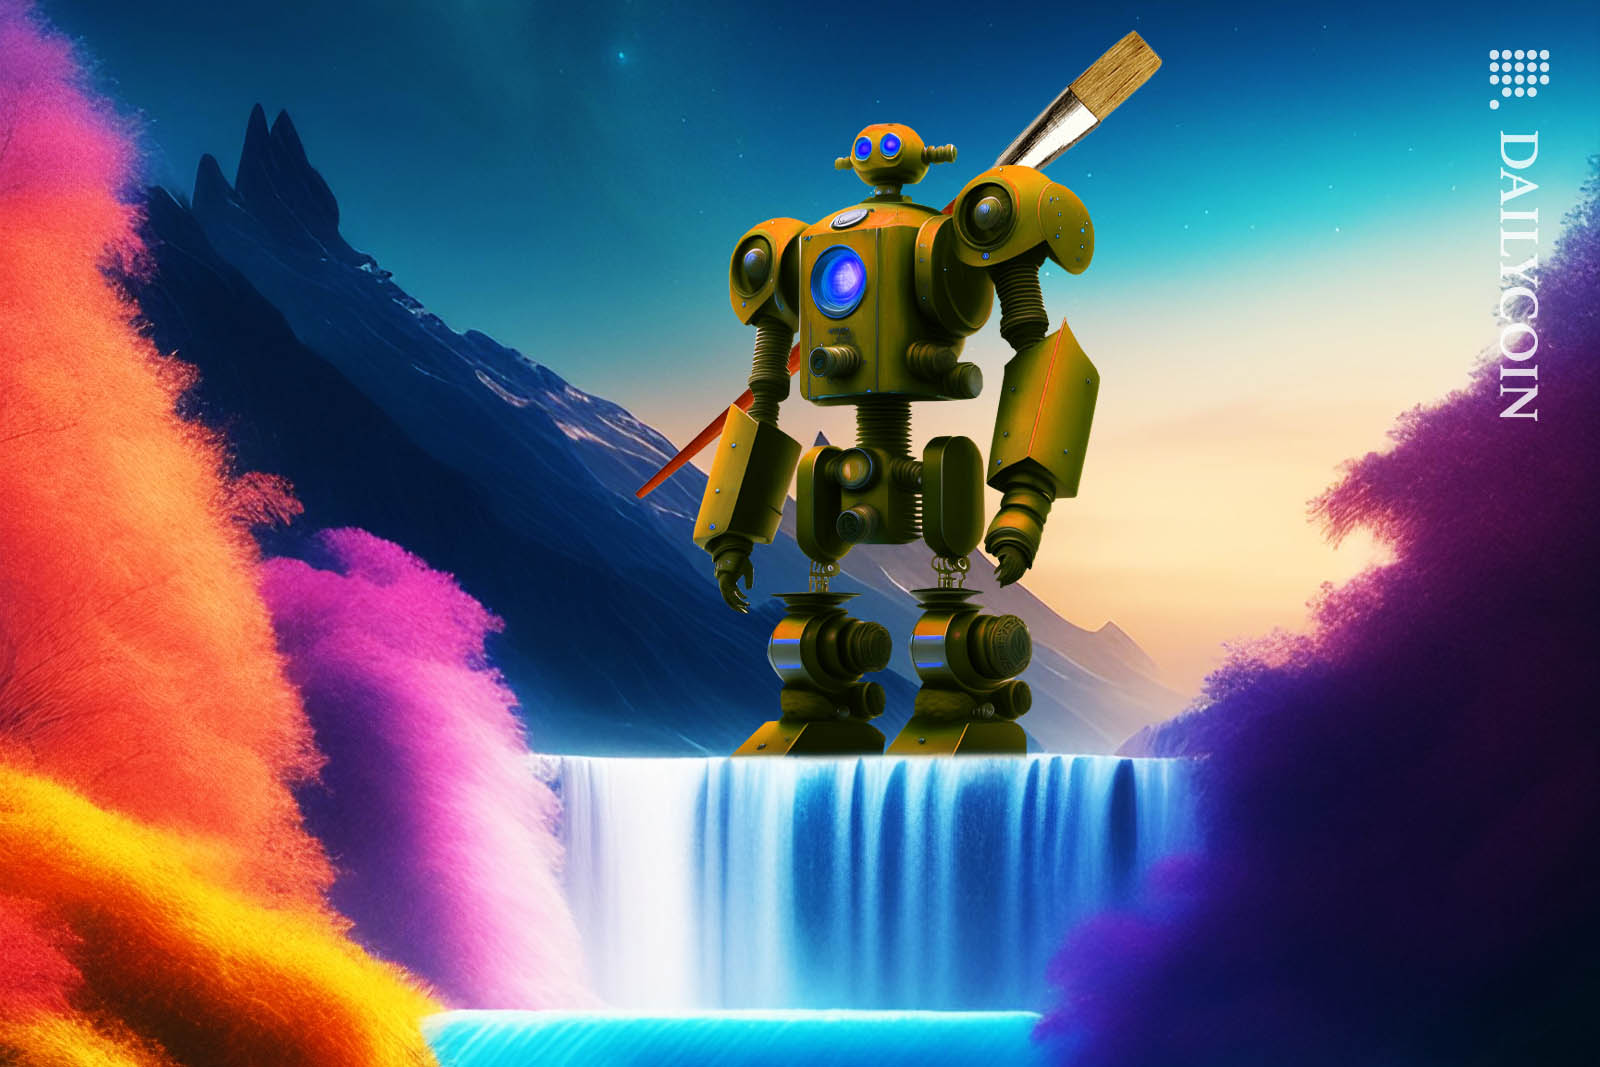 Robot standing in a dreamy waterfall with a paintbrush on its back.